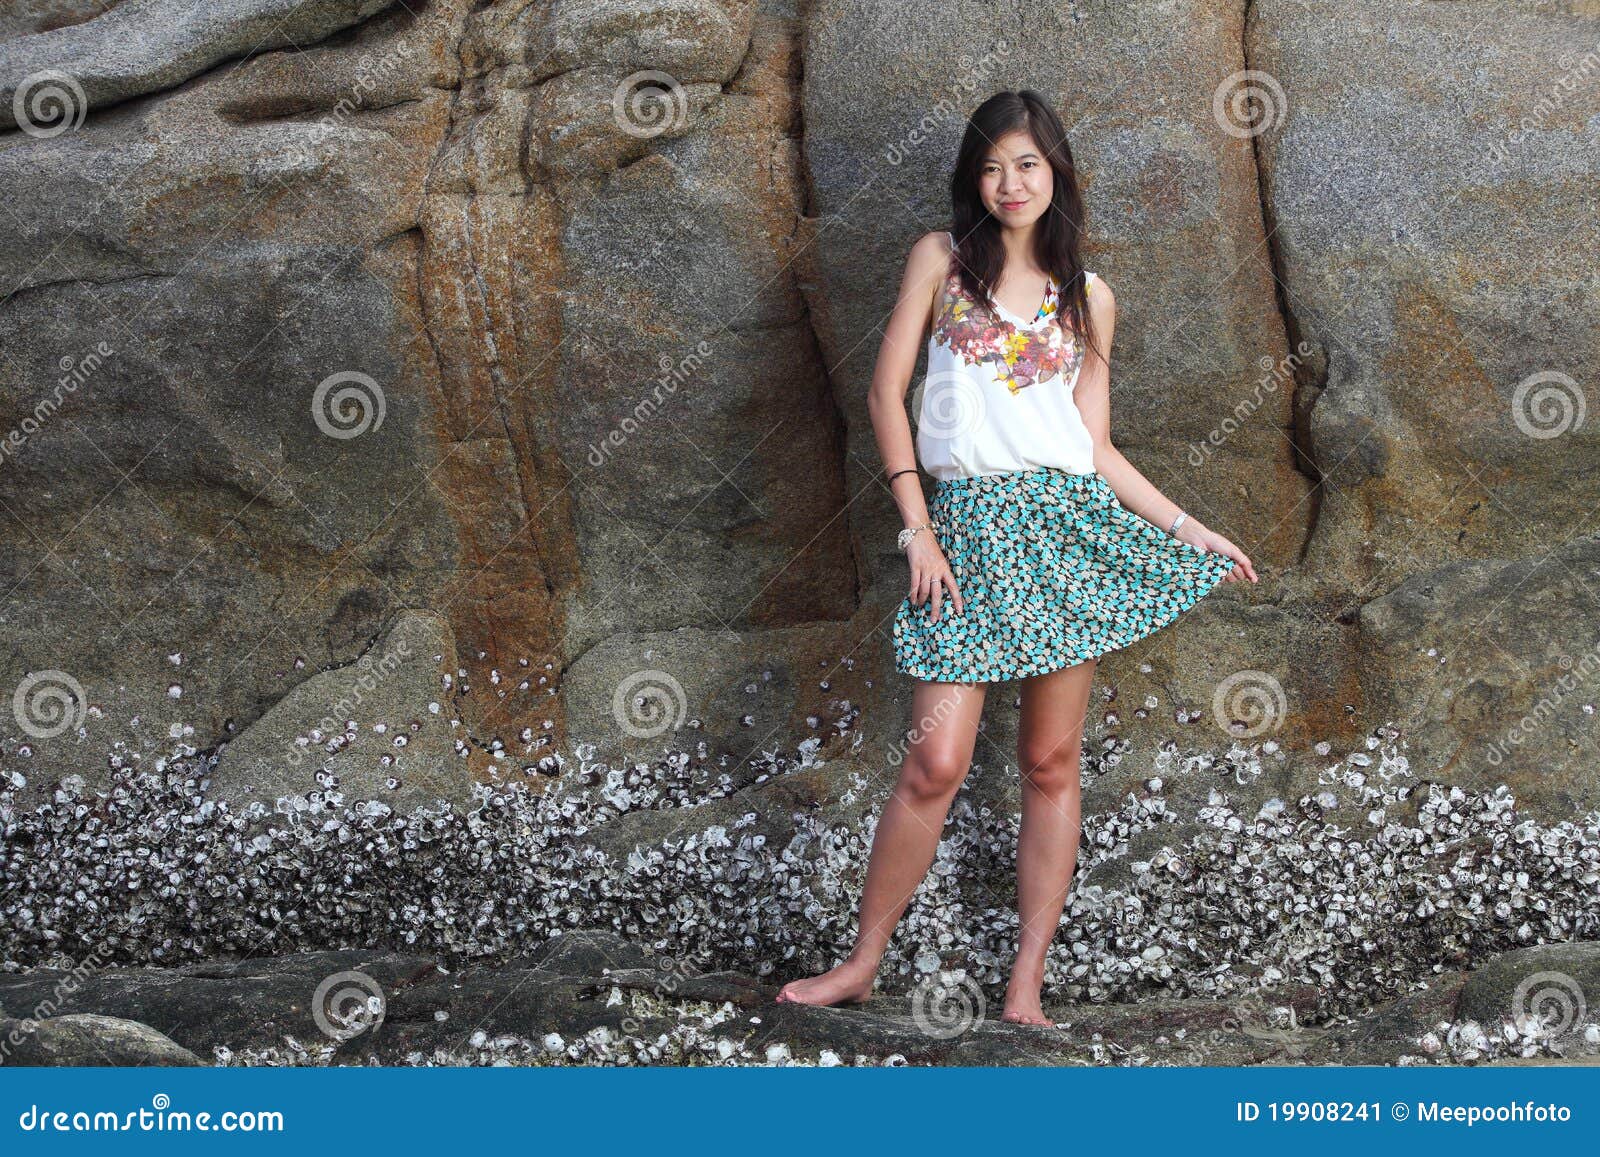 Beautiful Young Woman Posing On Stones Near Sea Stock Image Image Of Glamour Beauty 19908241 